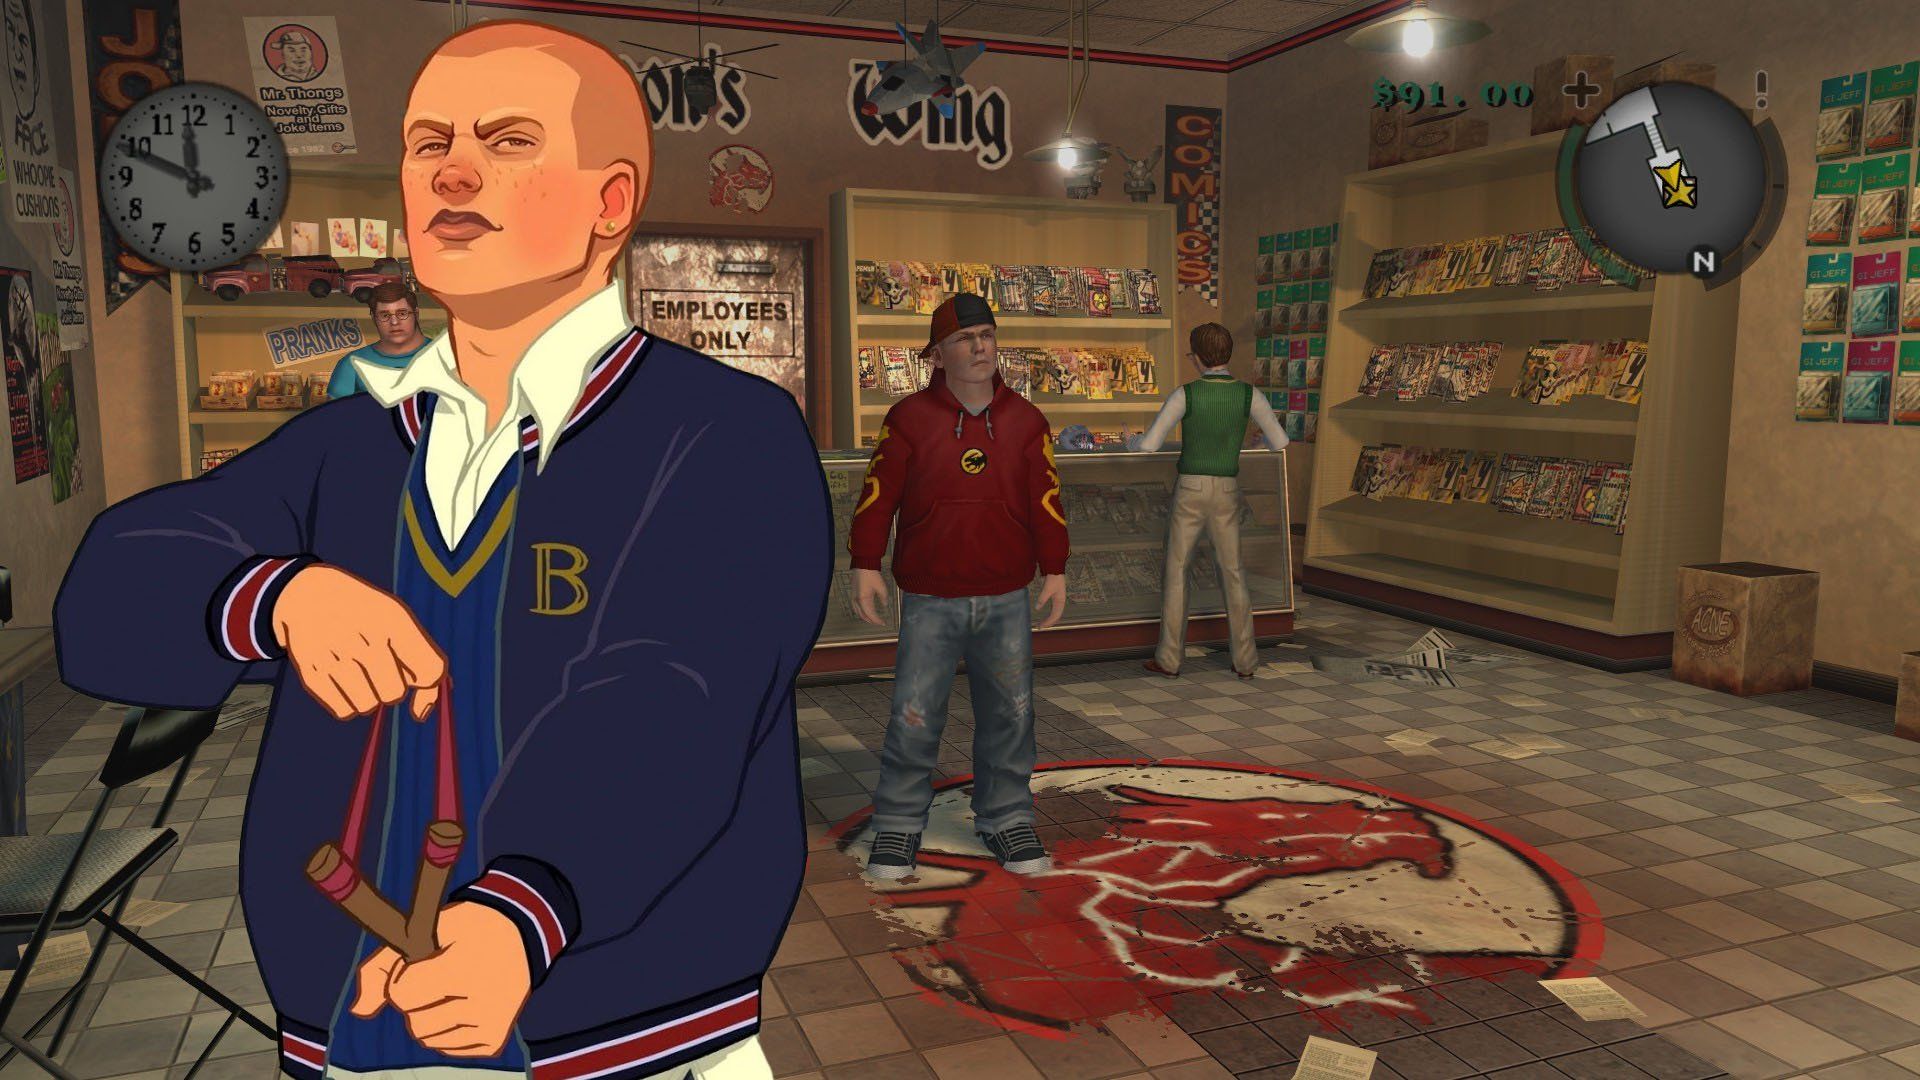 What Happened to Rockstar Games' 'Bully 2'? Rumors Say It was